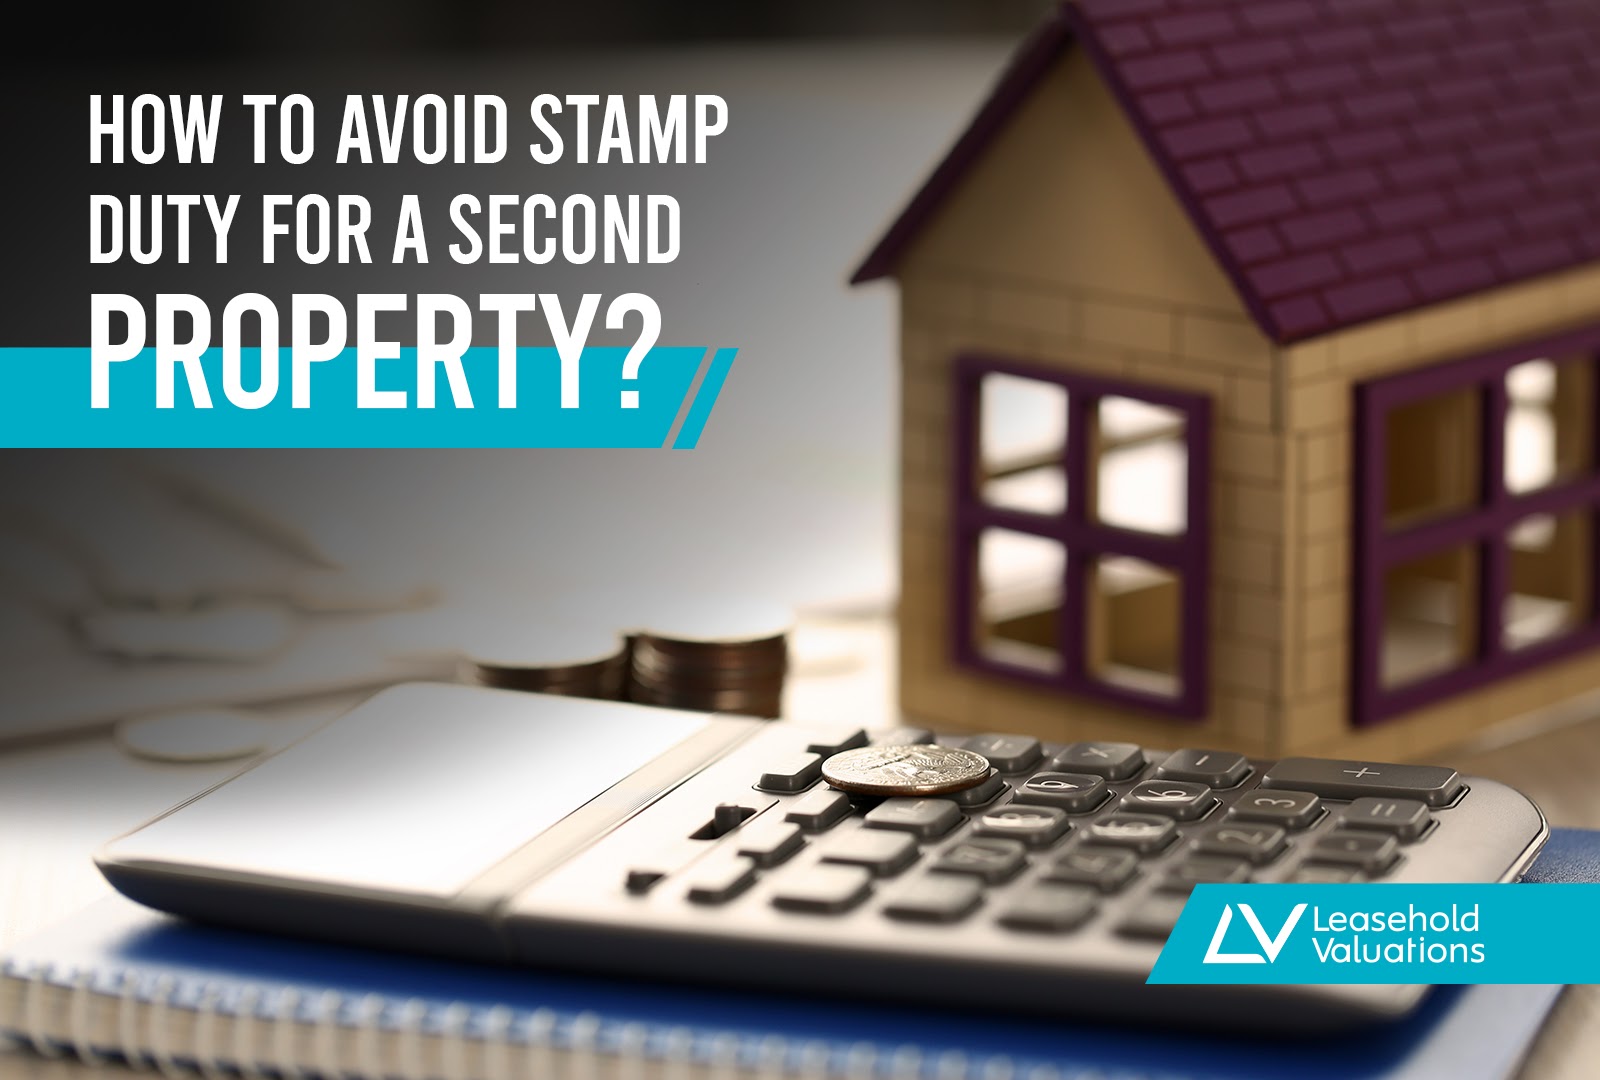 How to avoid stamp duty for a second property